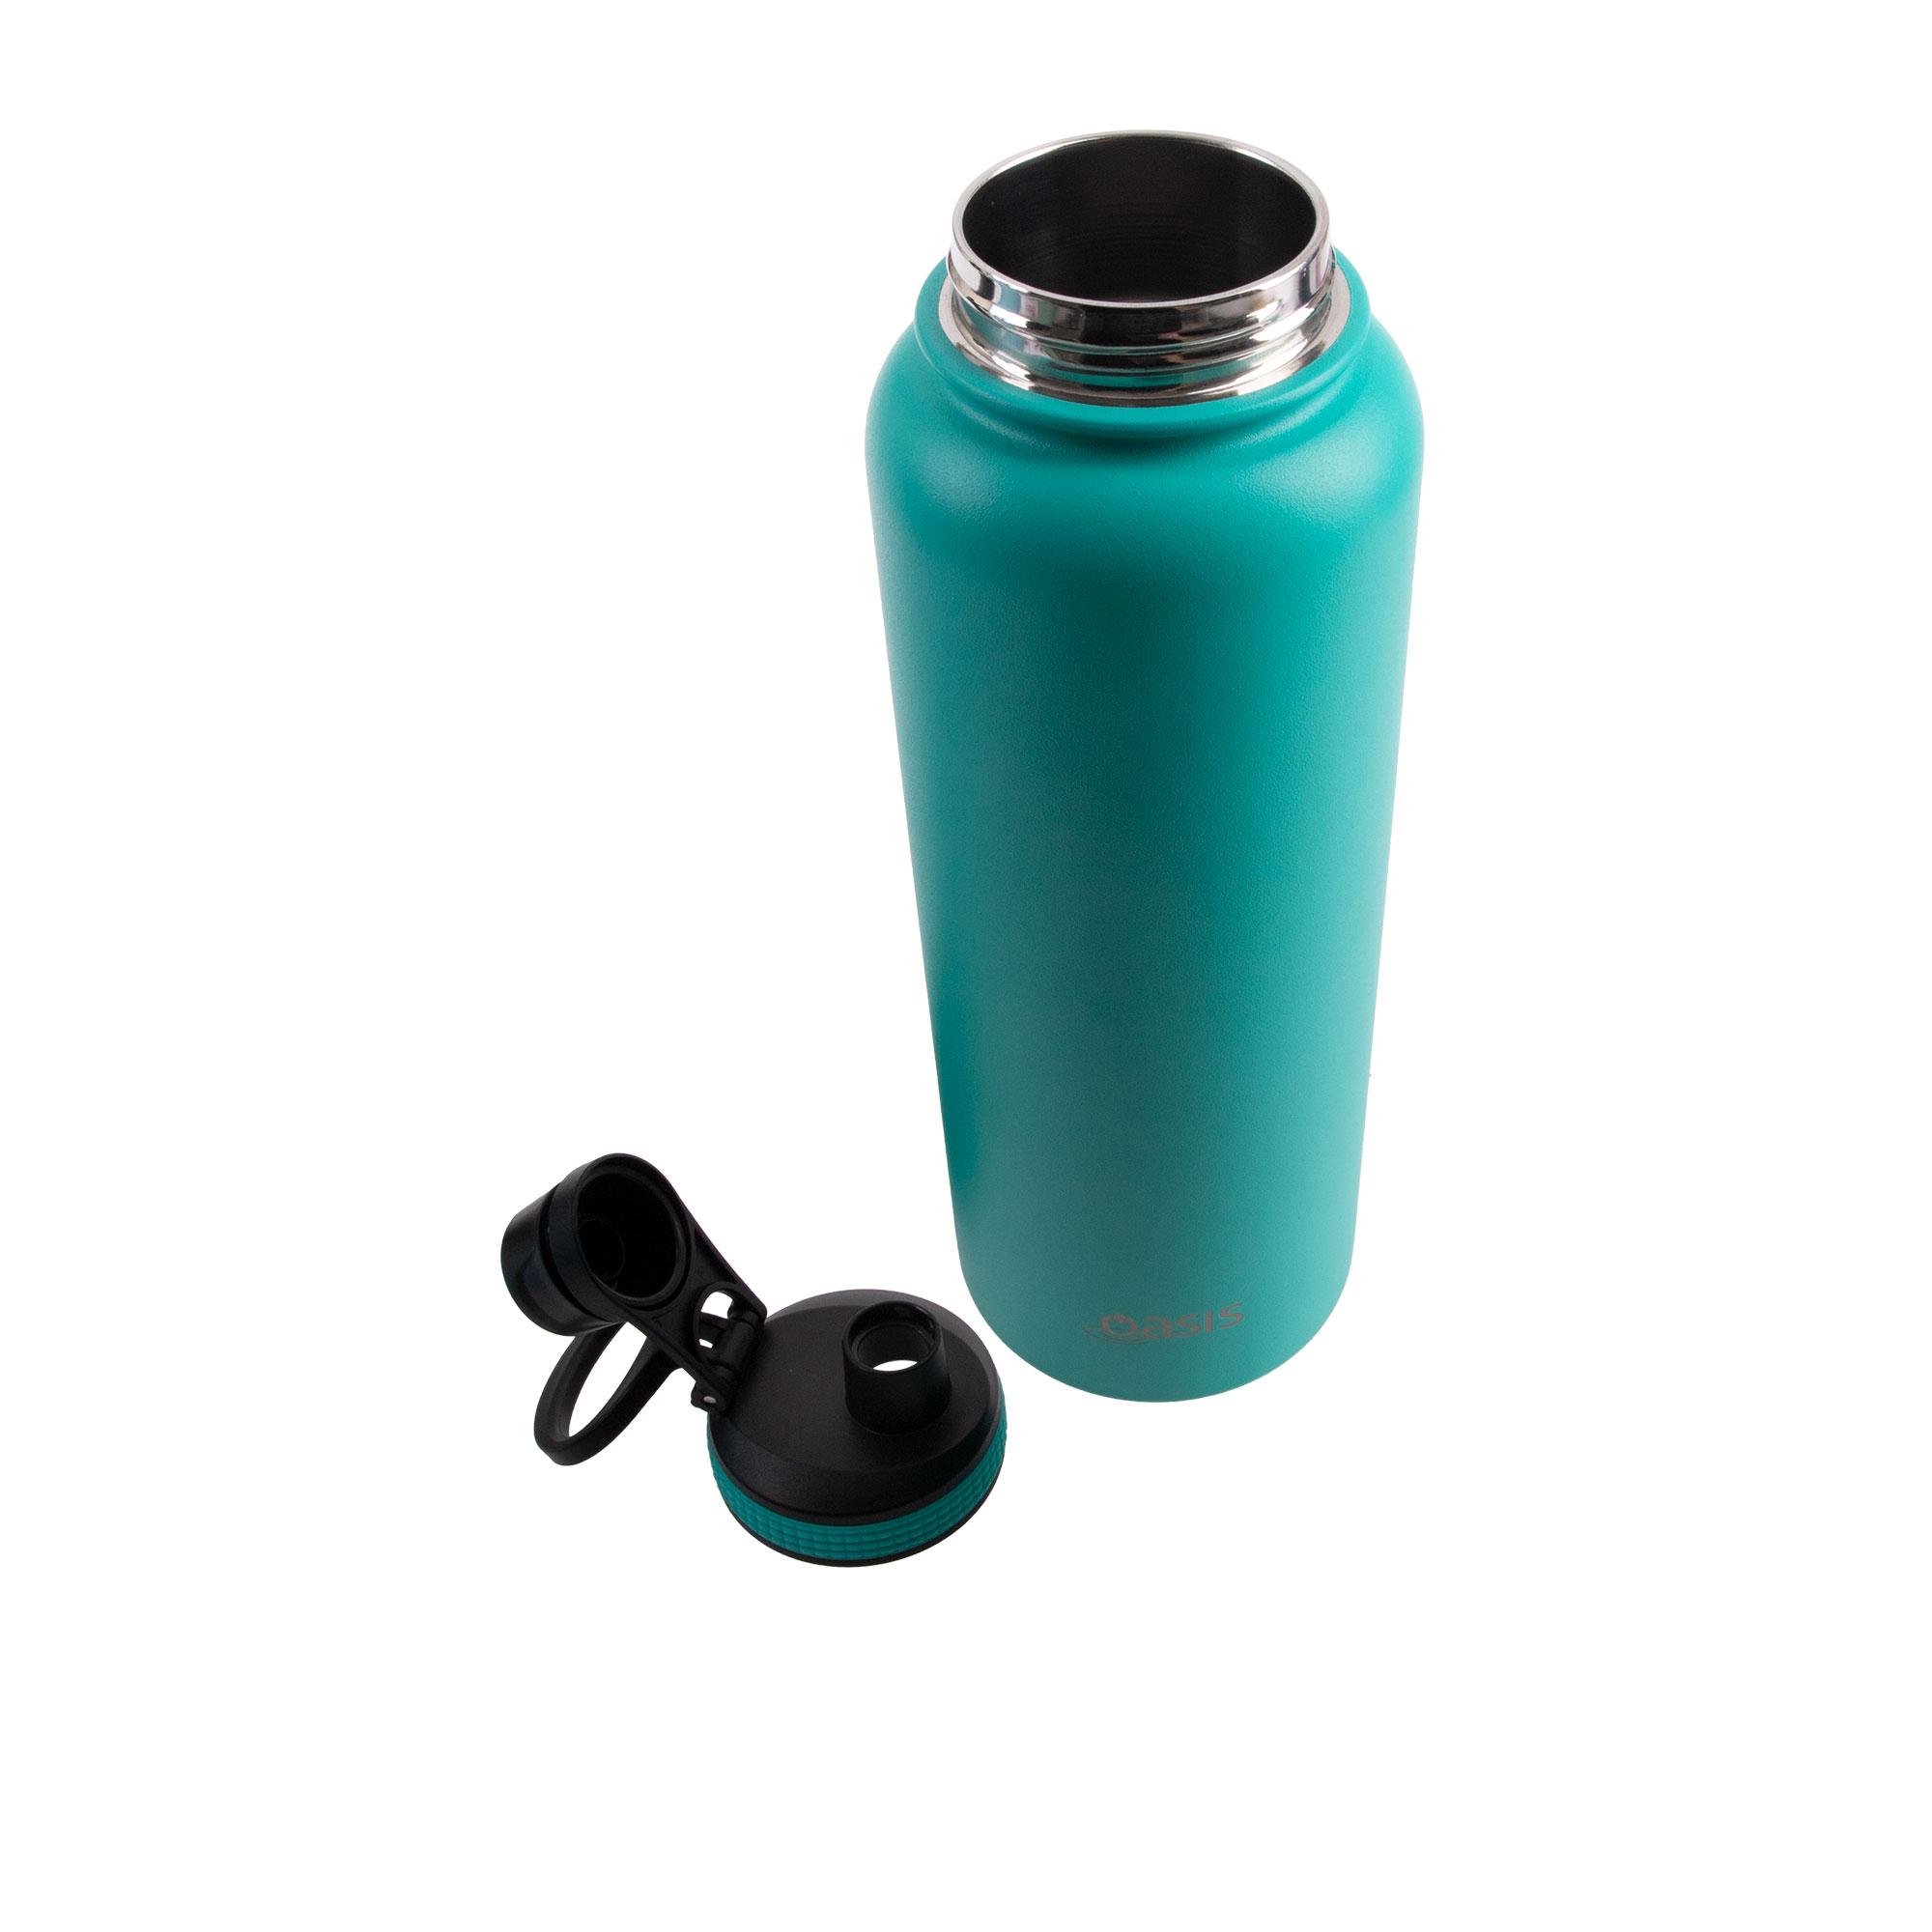 Oasis Challenger Double Wall Insulated Sports Bottle 1.1L Turquoise Image 3